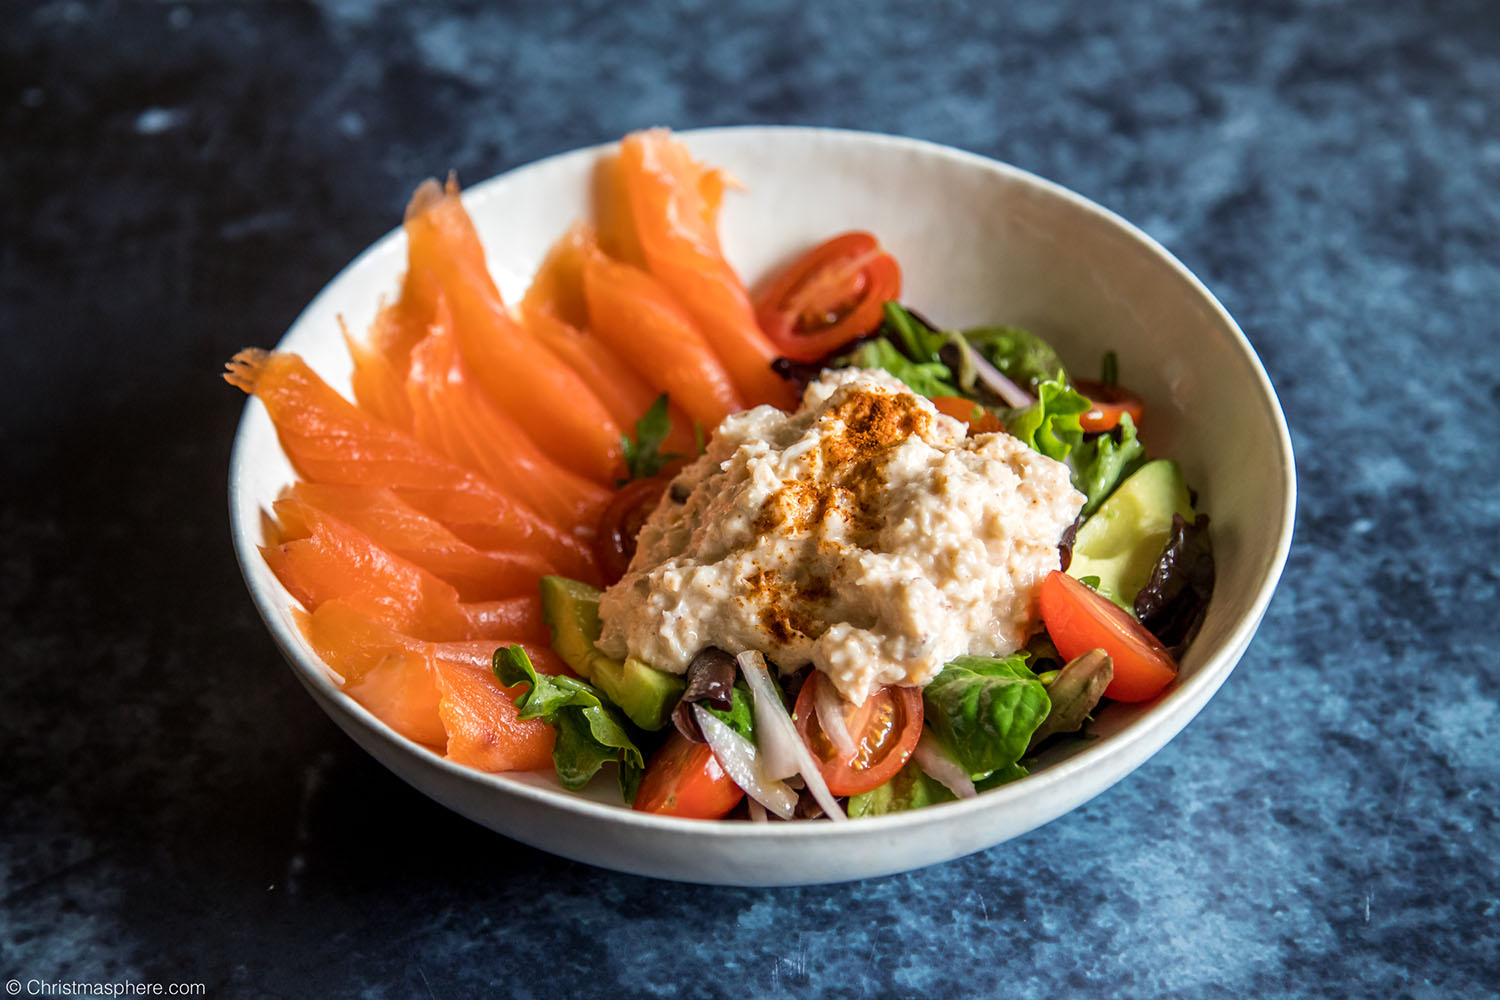 Smoked Salmon and Crabmeat Salad